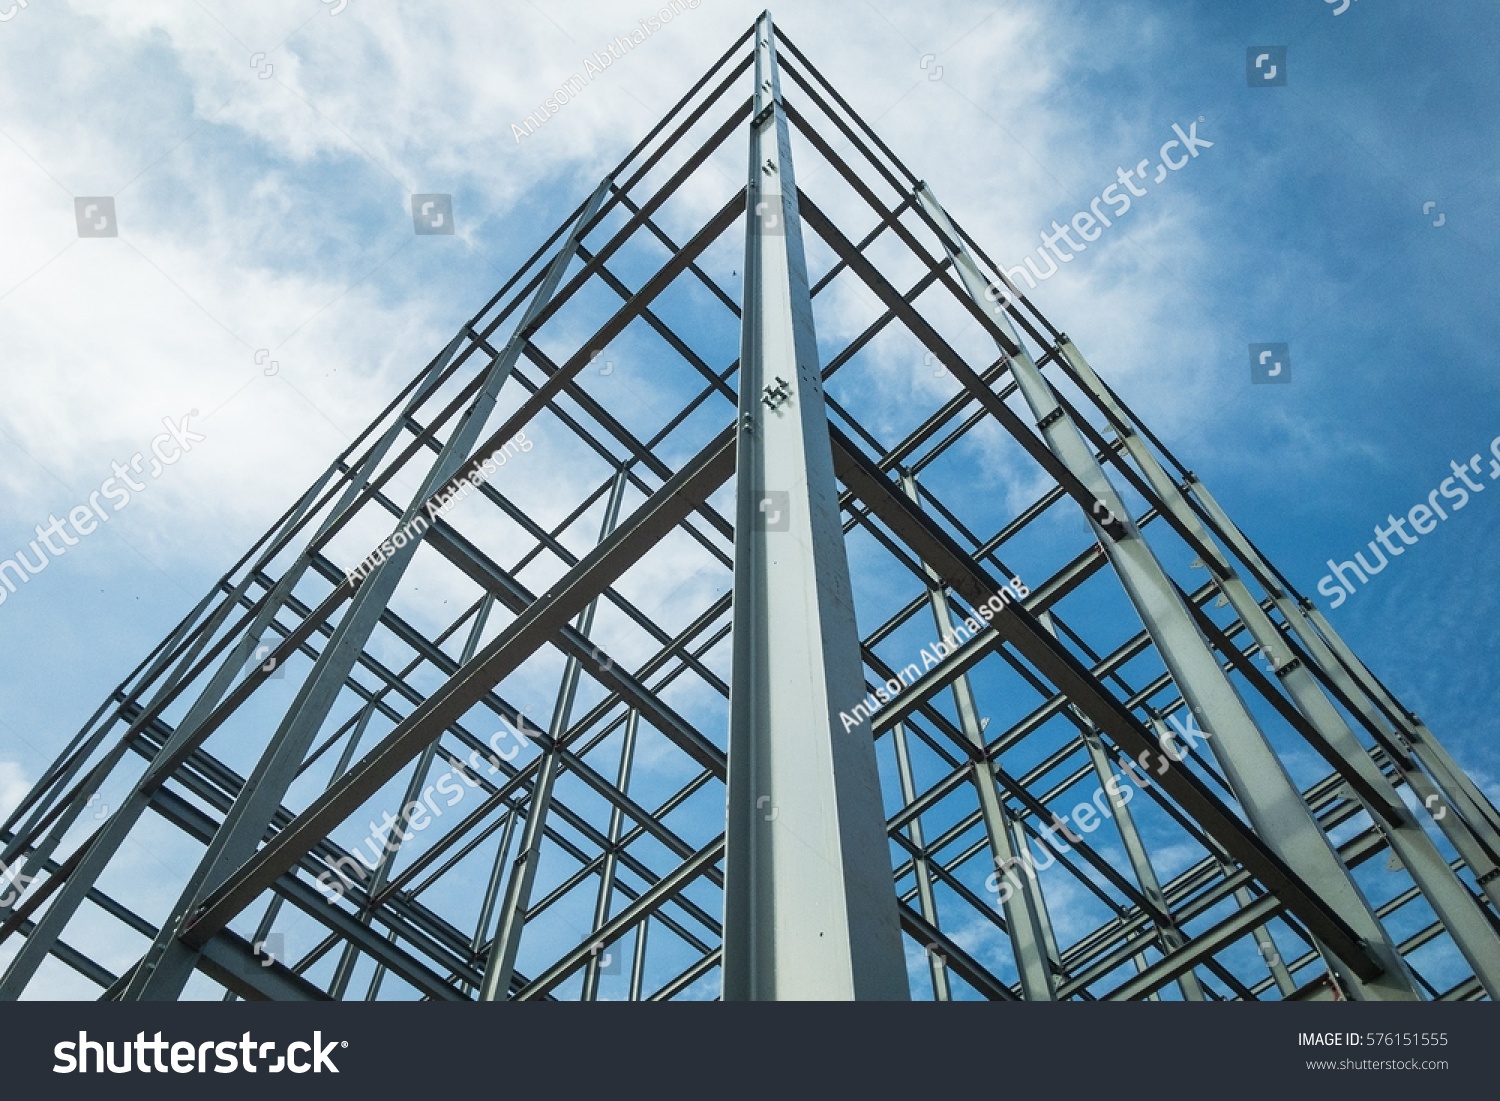 Structure of steel  for building construction on sky background. #576151555